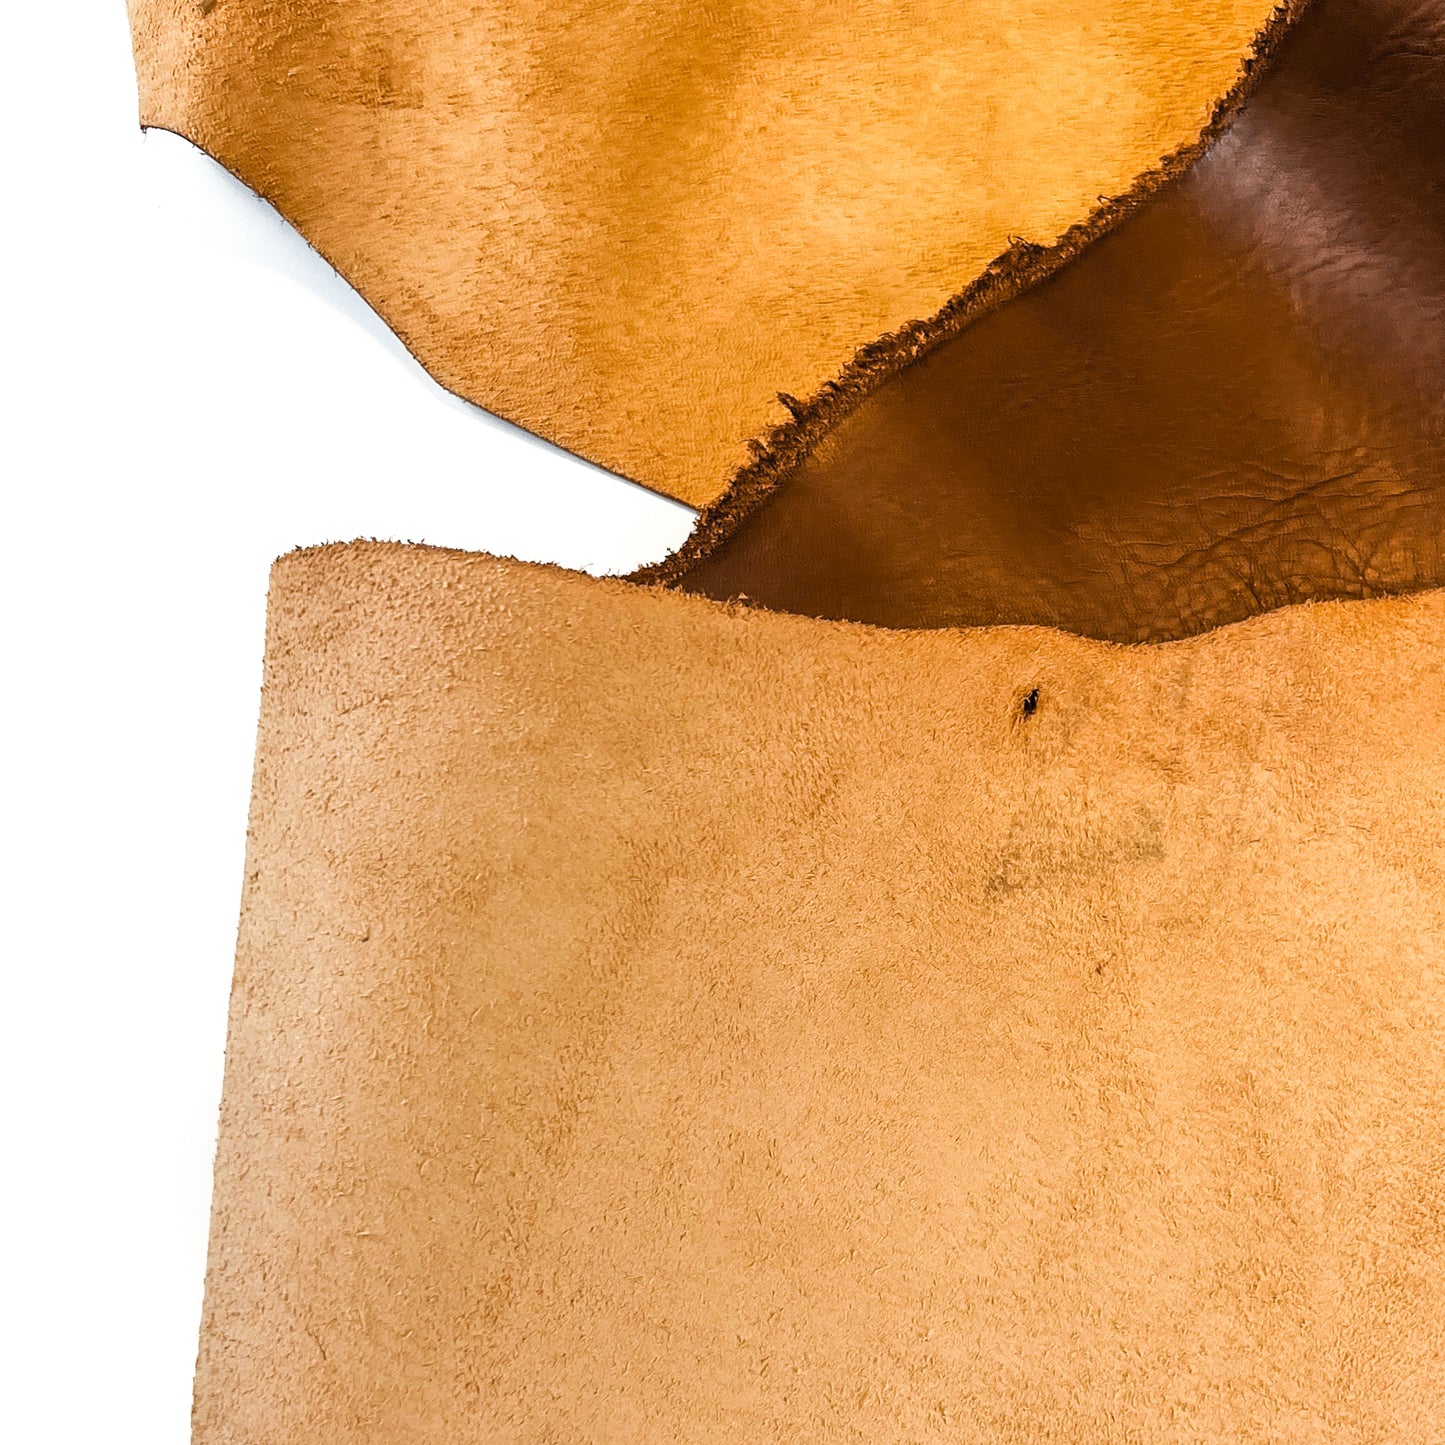 Brown Thick Calf Vegetable With Texture 1.7-1.9mm/4.25-4.75oz / Classic BROWN VEG TAN 1453